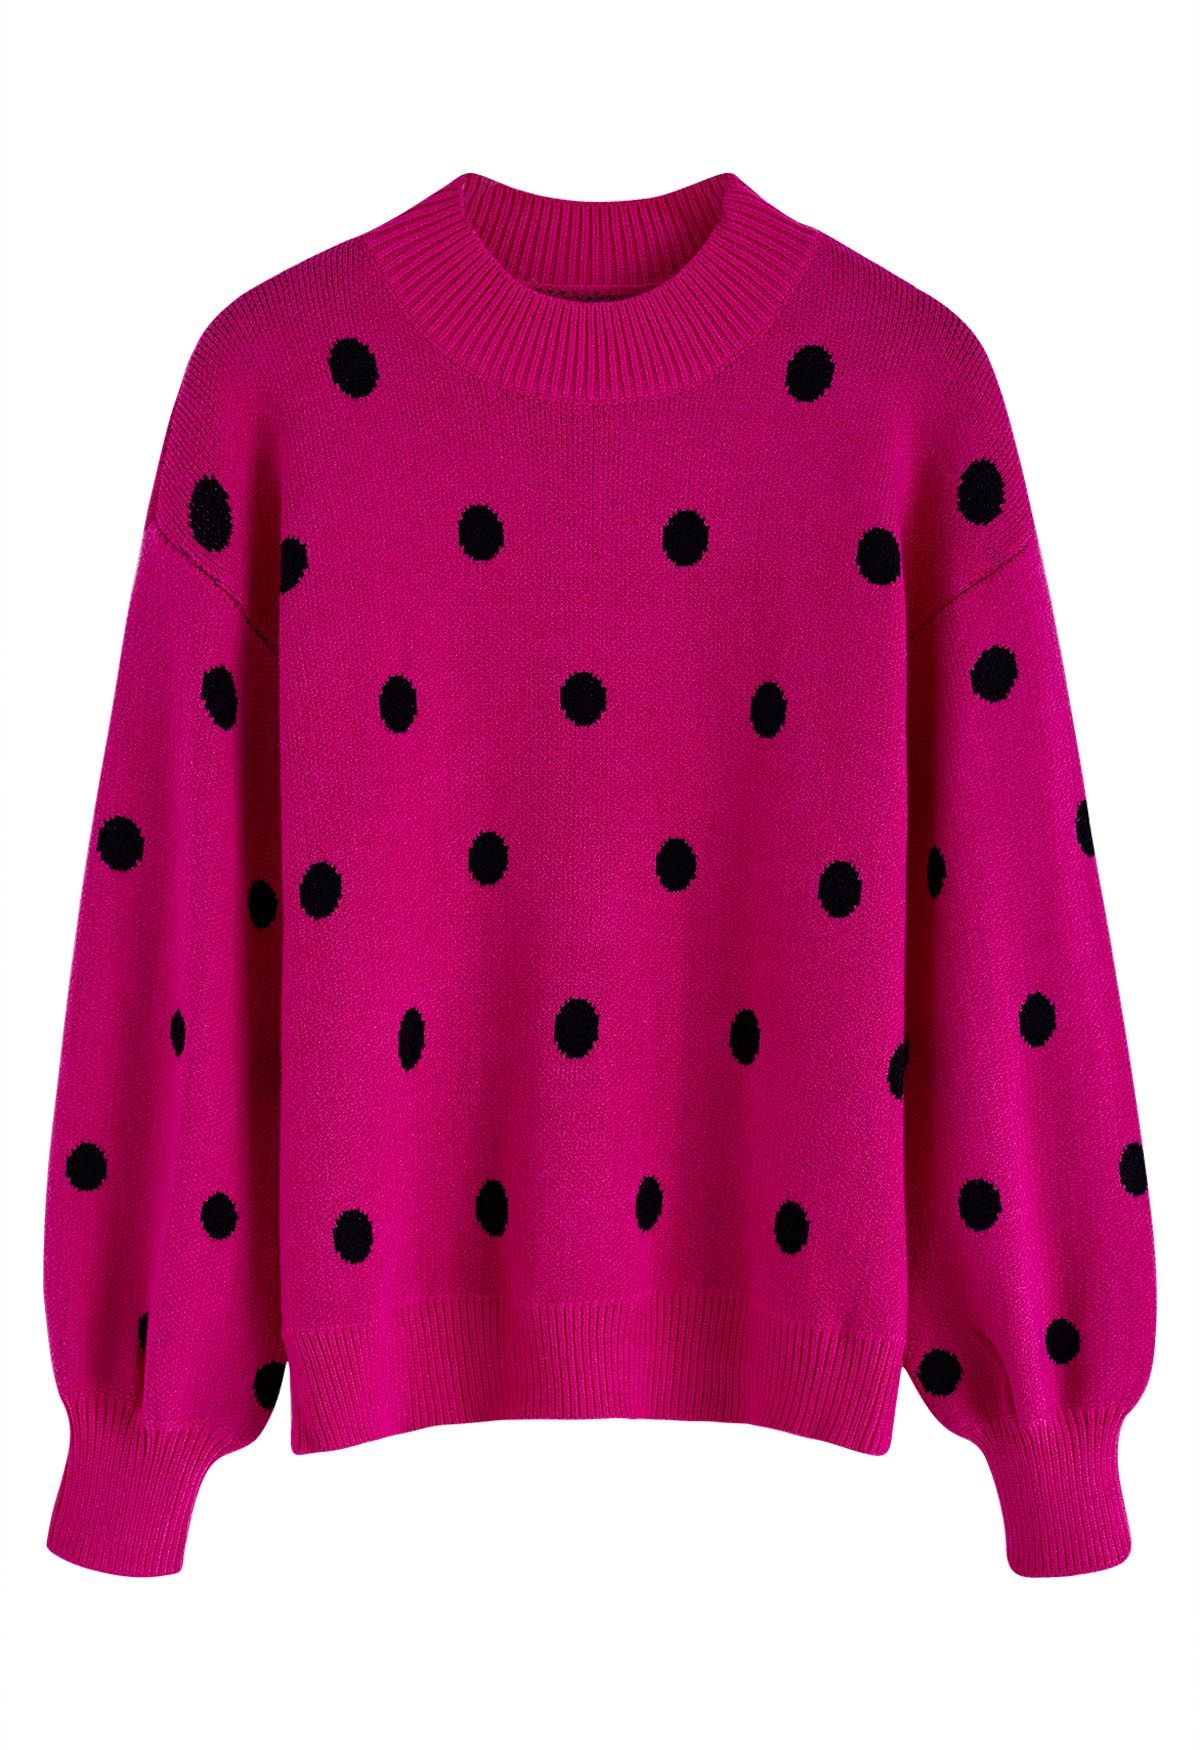 Adorable Polka Dot Mock Neck Knit Sweater in Hot Pink